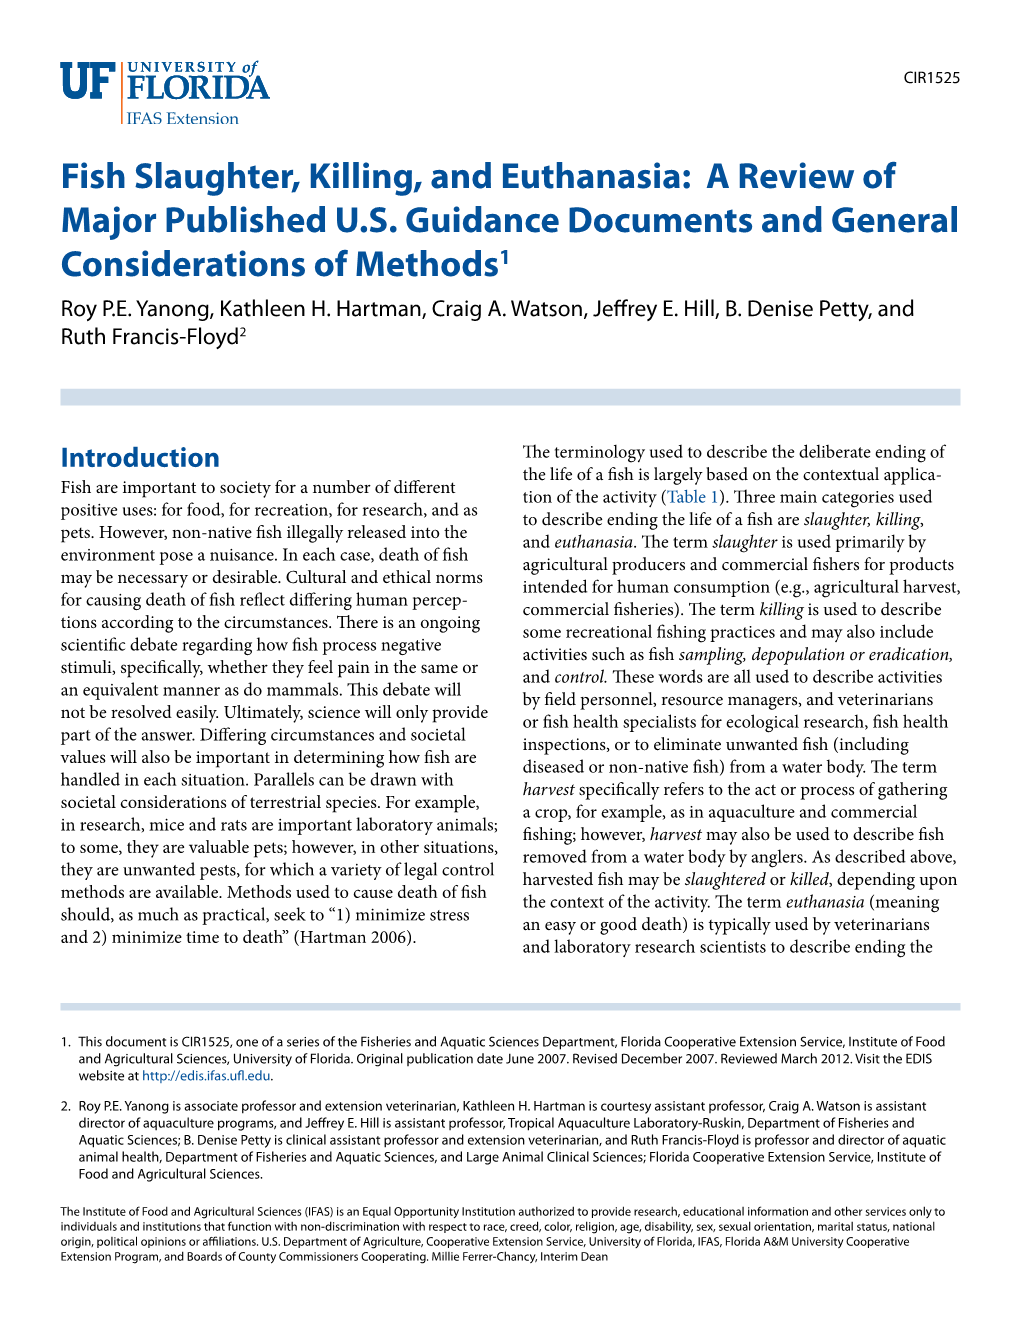 Fish Slaughter, Killing, and Euthanasia: a Review of Major Published U.S. Guidance Documents and General Considerations of Methods1 Roy P.E